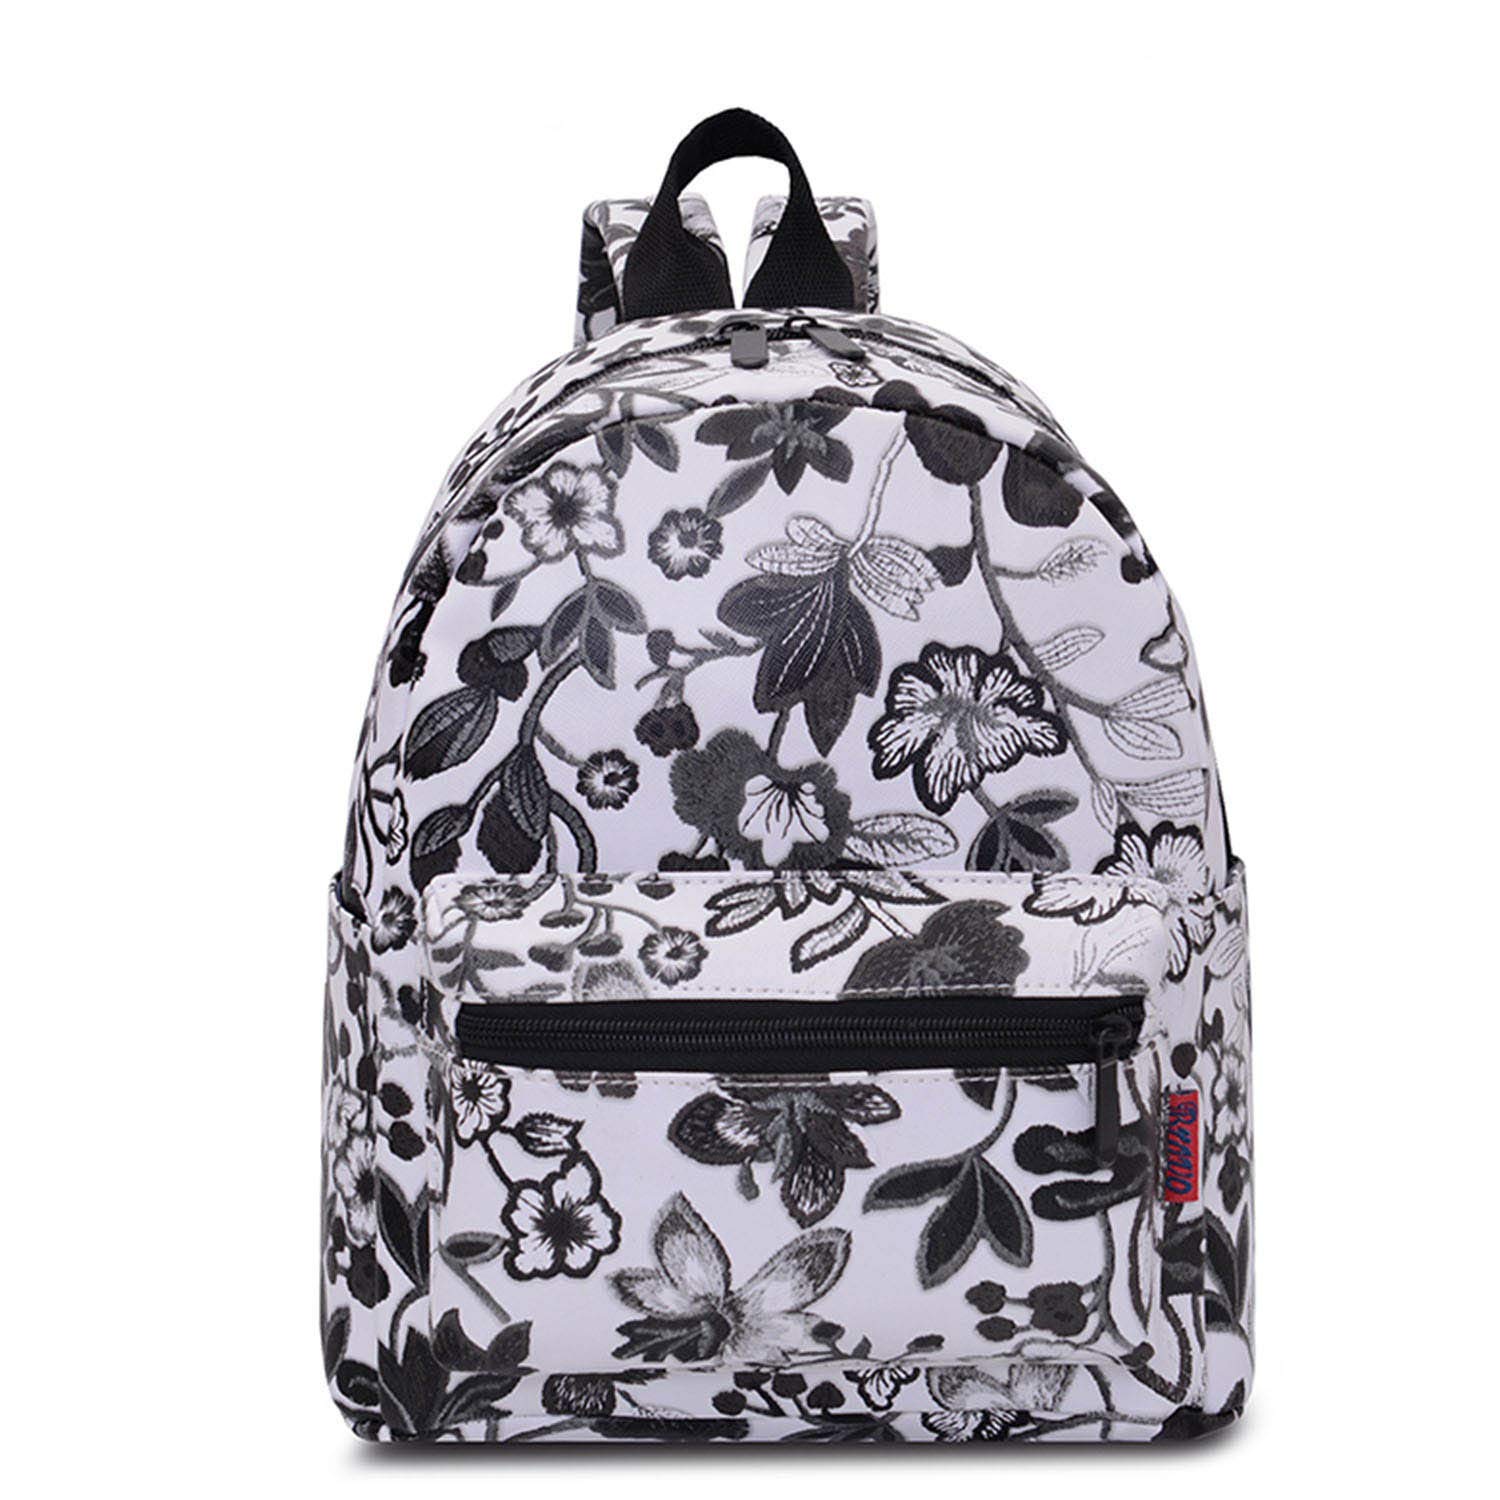 Bravo Small Backpack 12